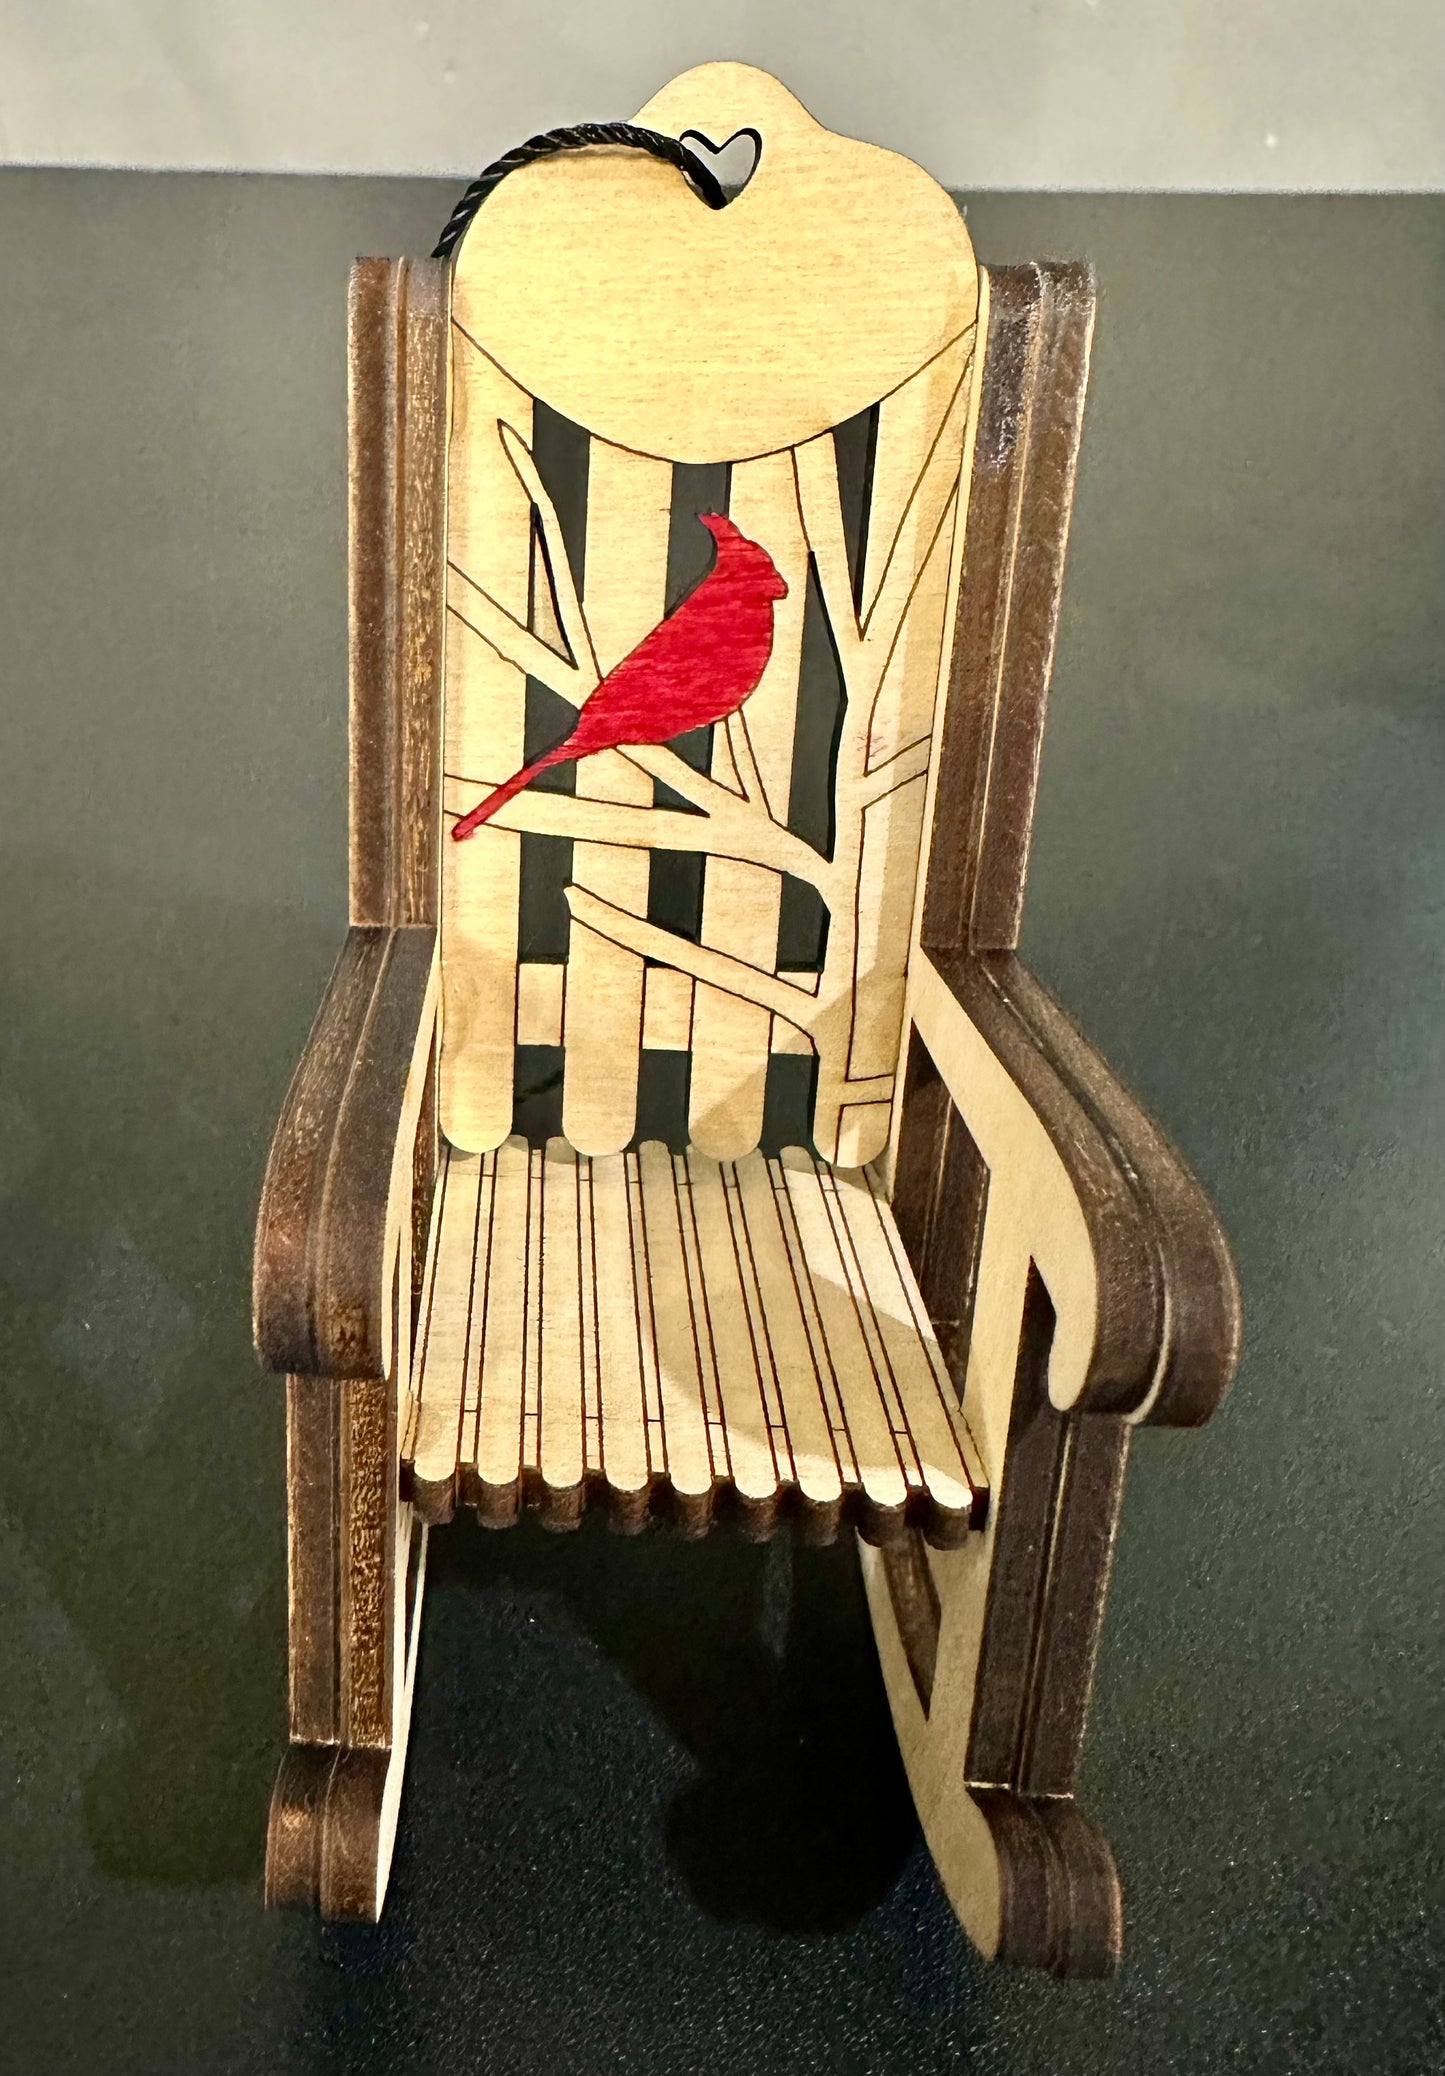 Rocking Chair with Cardinal Wooden Ornament